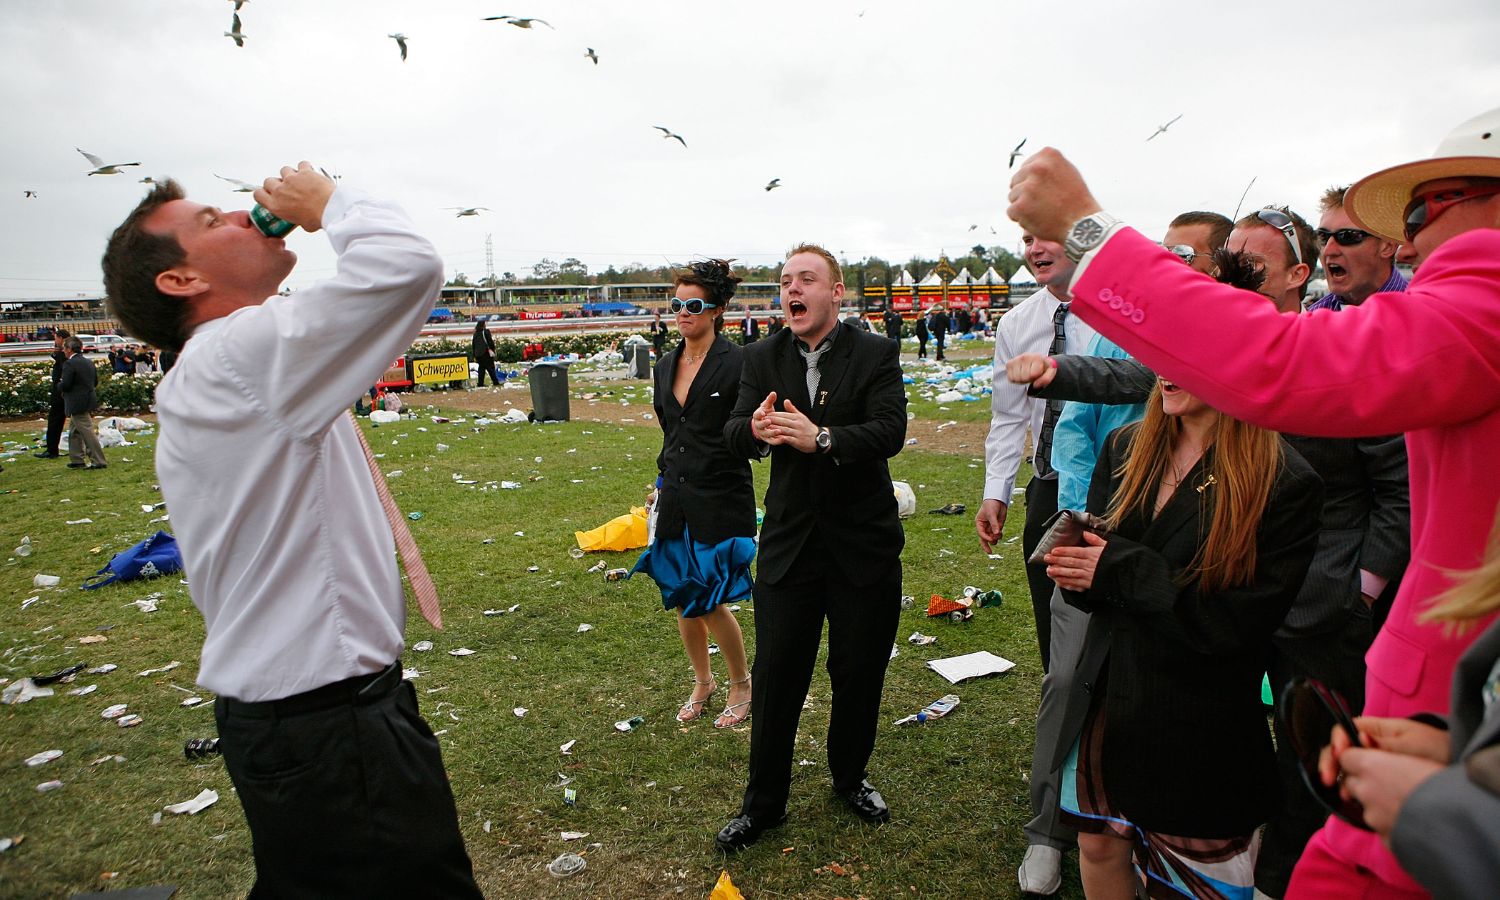 An image of people drinking alcohol at the melbourne cup in 2019